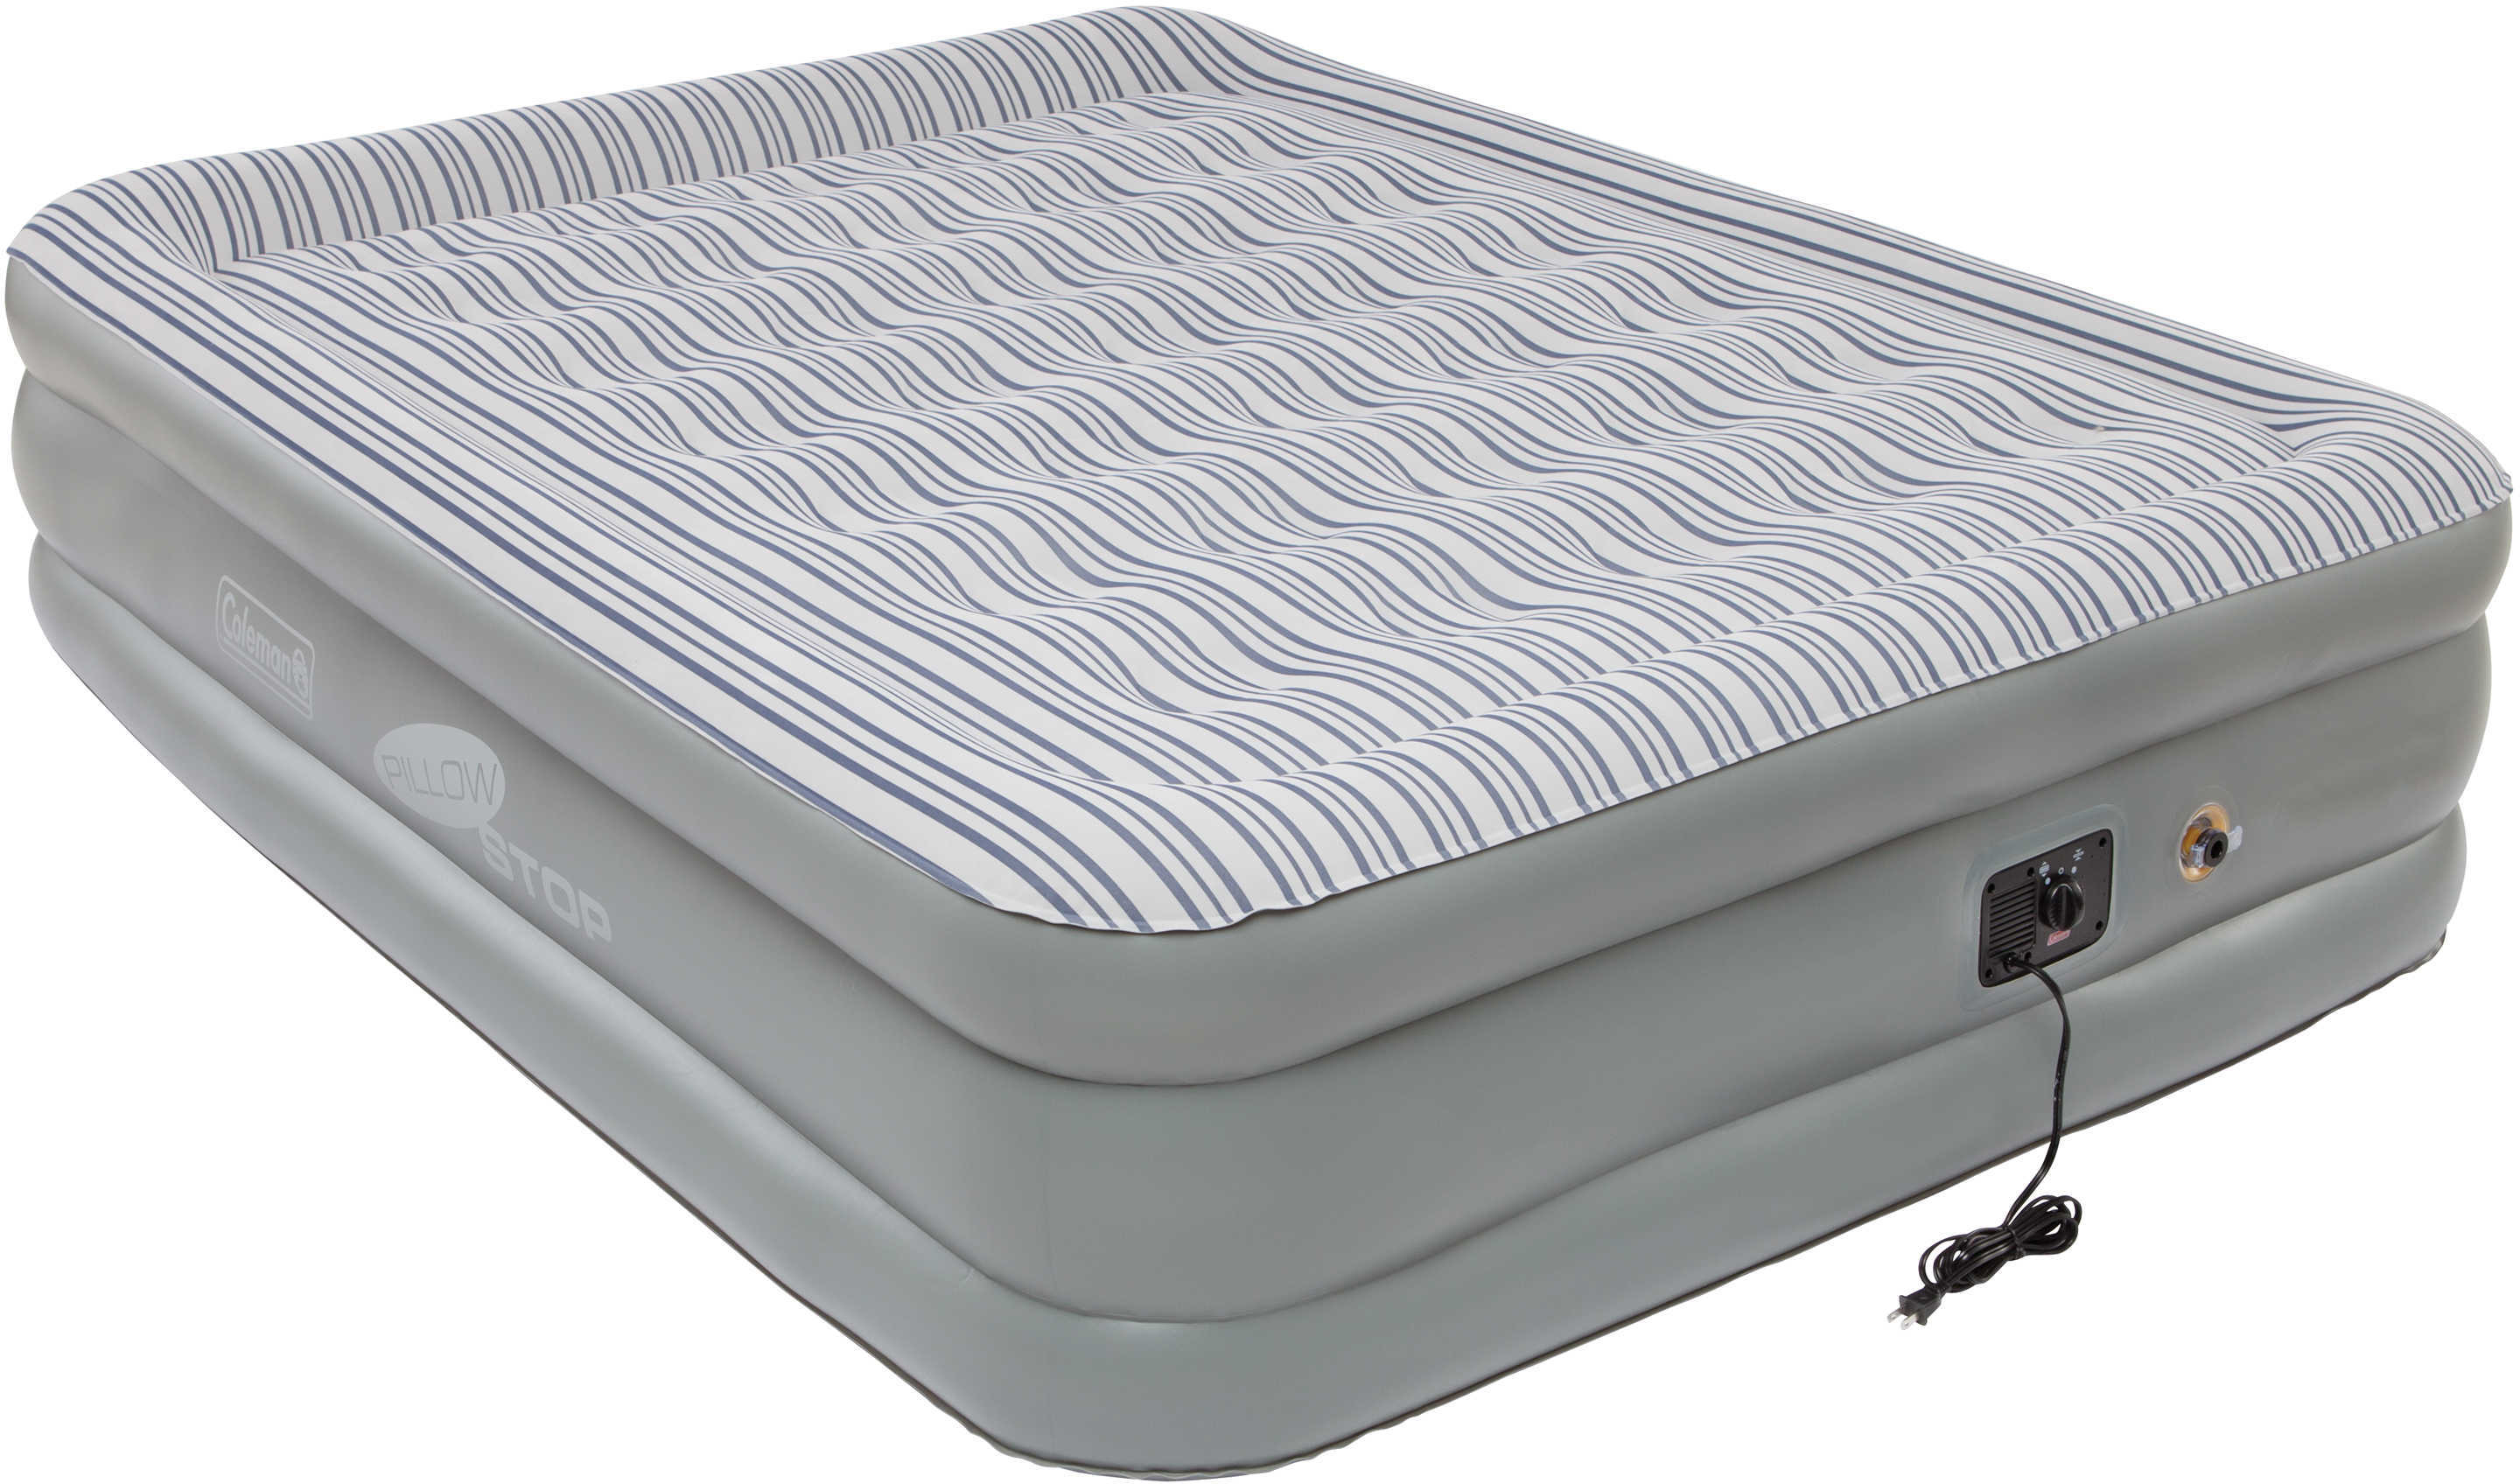 Coleman Airbed Queen Dh 120V Bip C002 2000025035